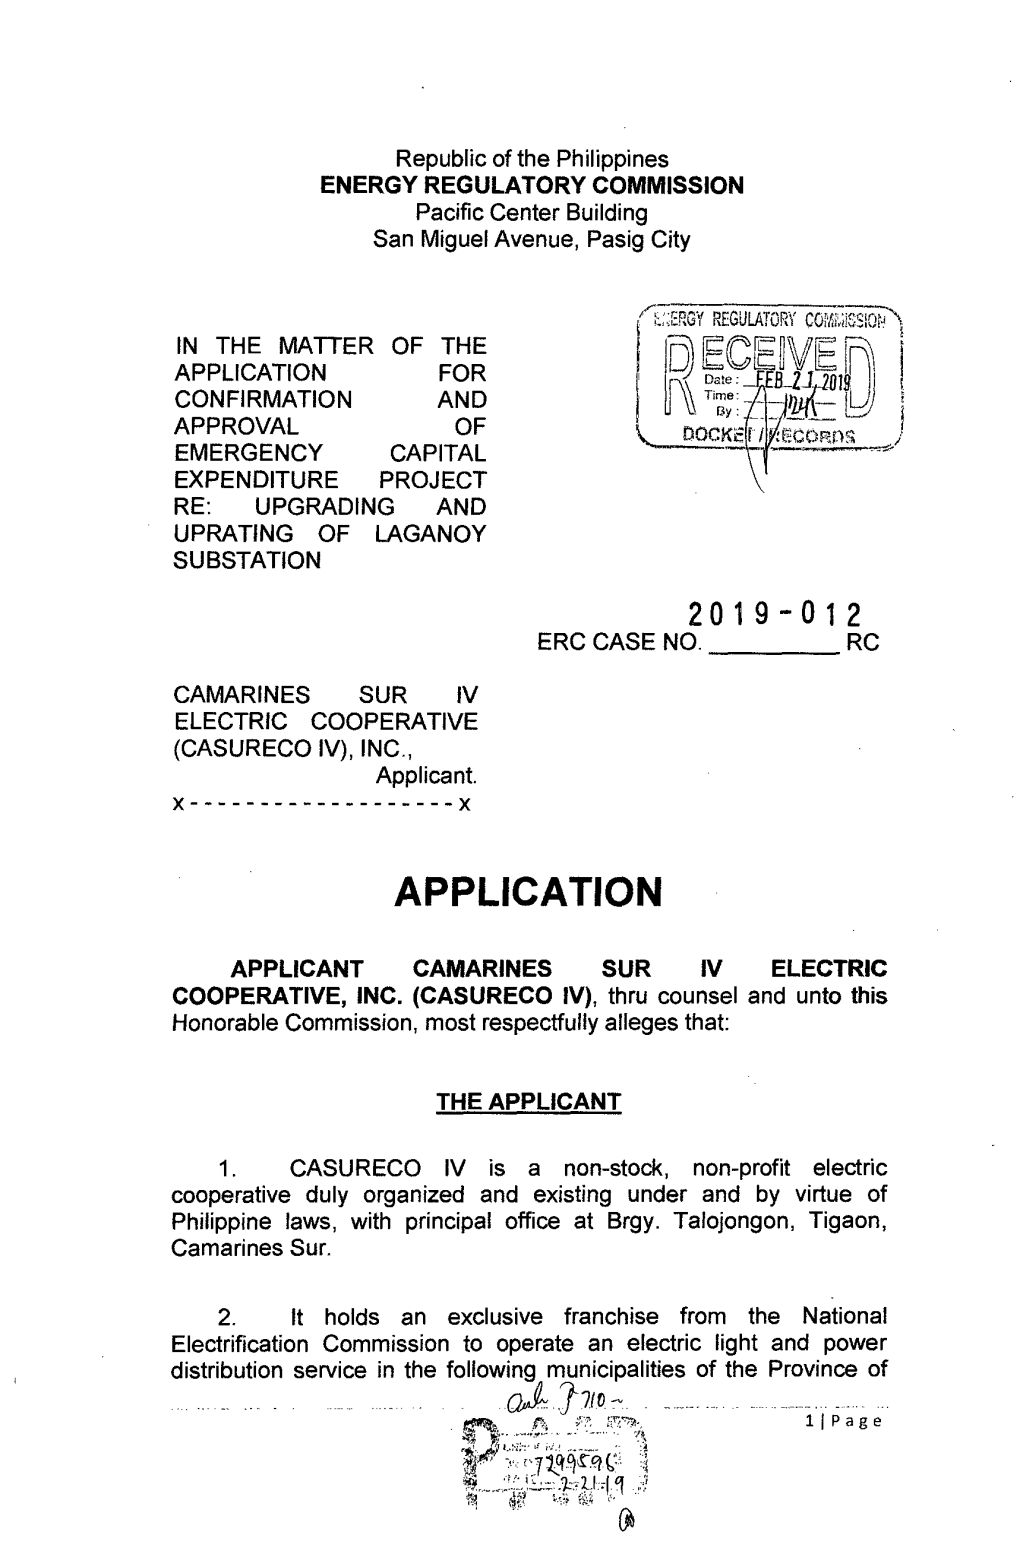 ECEDVE[Ñ CONFIRMATION� and R3y a ~W APPROVAL � of Rcorns EMERGENCY �CAPITAL EXPENDITURE PROJECT RE: UPGRADING and UPRATING of LAGANOY SUBSTATION 2019-012 ERC CASE NO